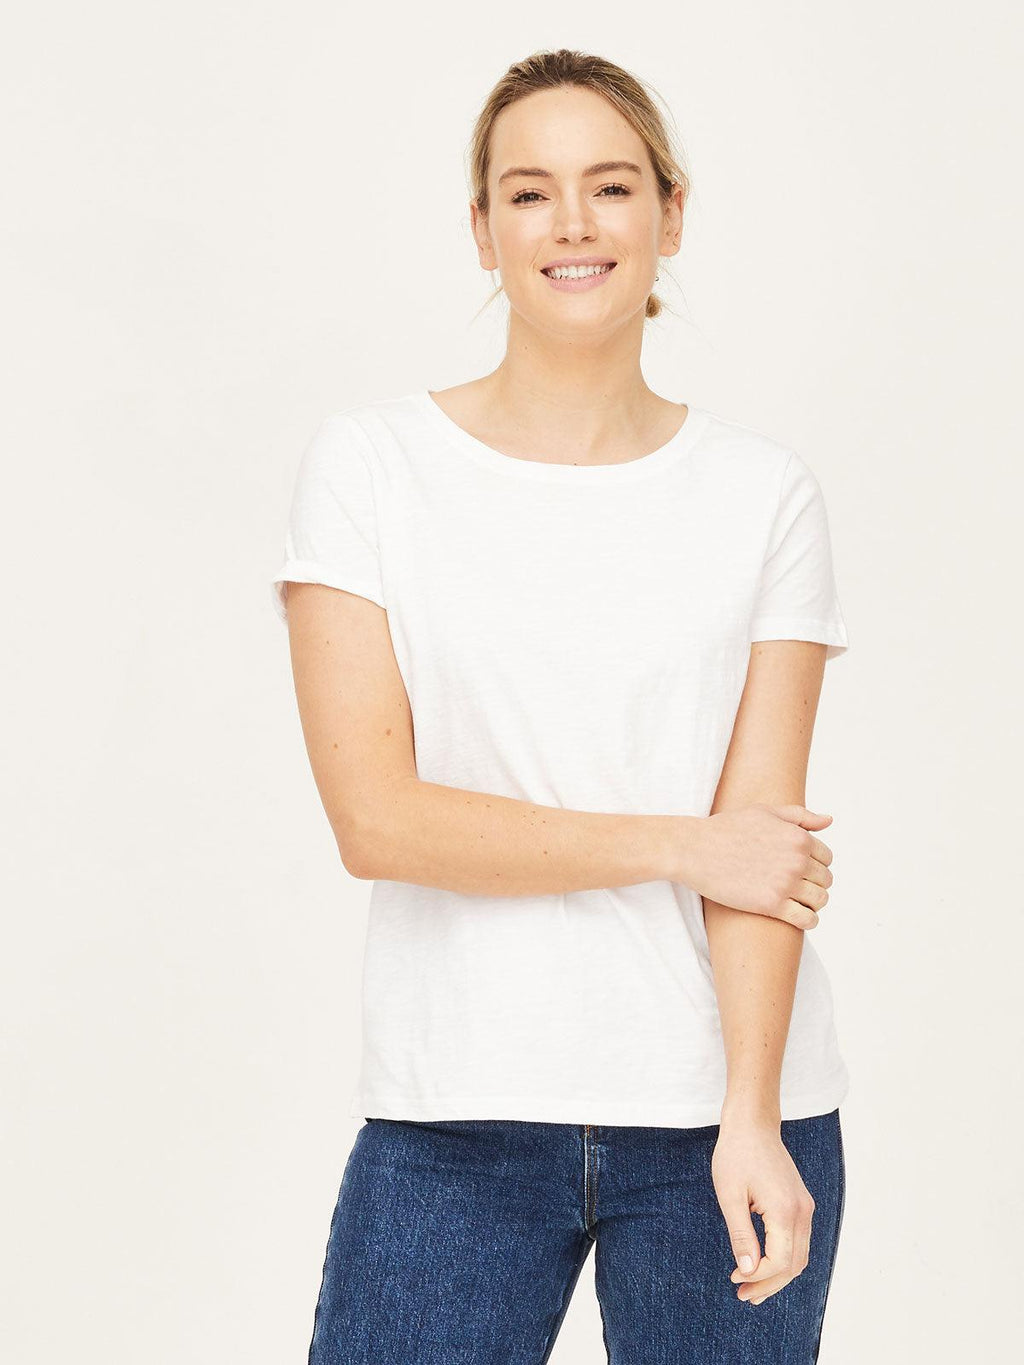 Wholesale organic cotton T-shirts — We specialize in fairtrade & organic  cotton bags, apparel & accessories